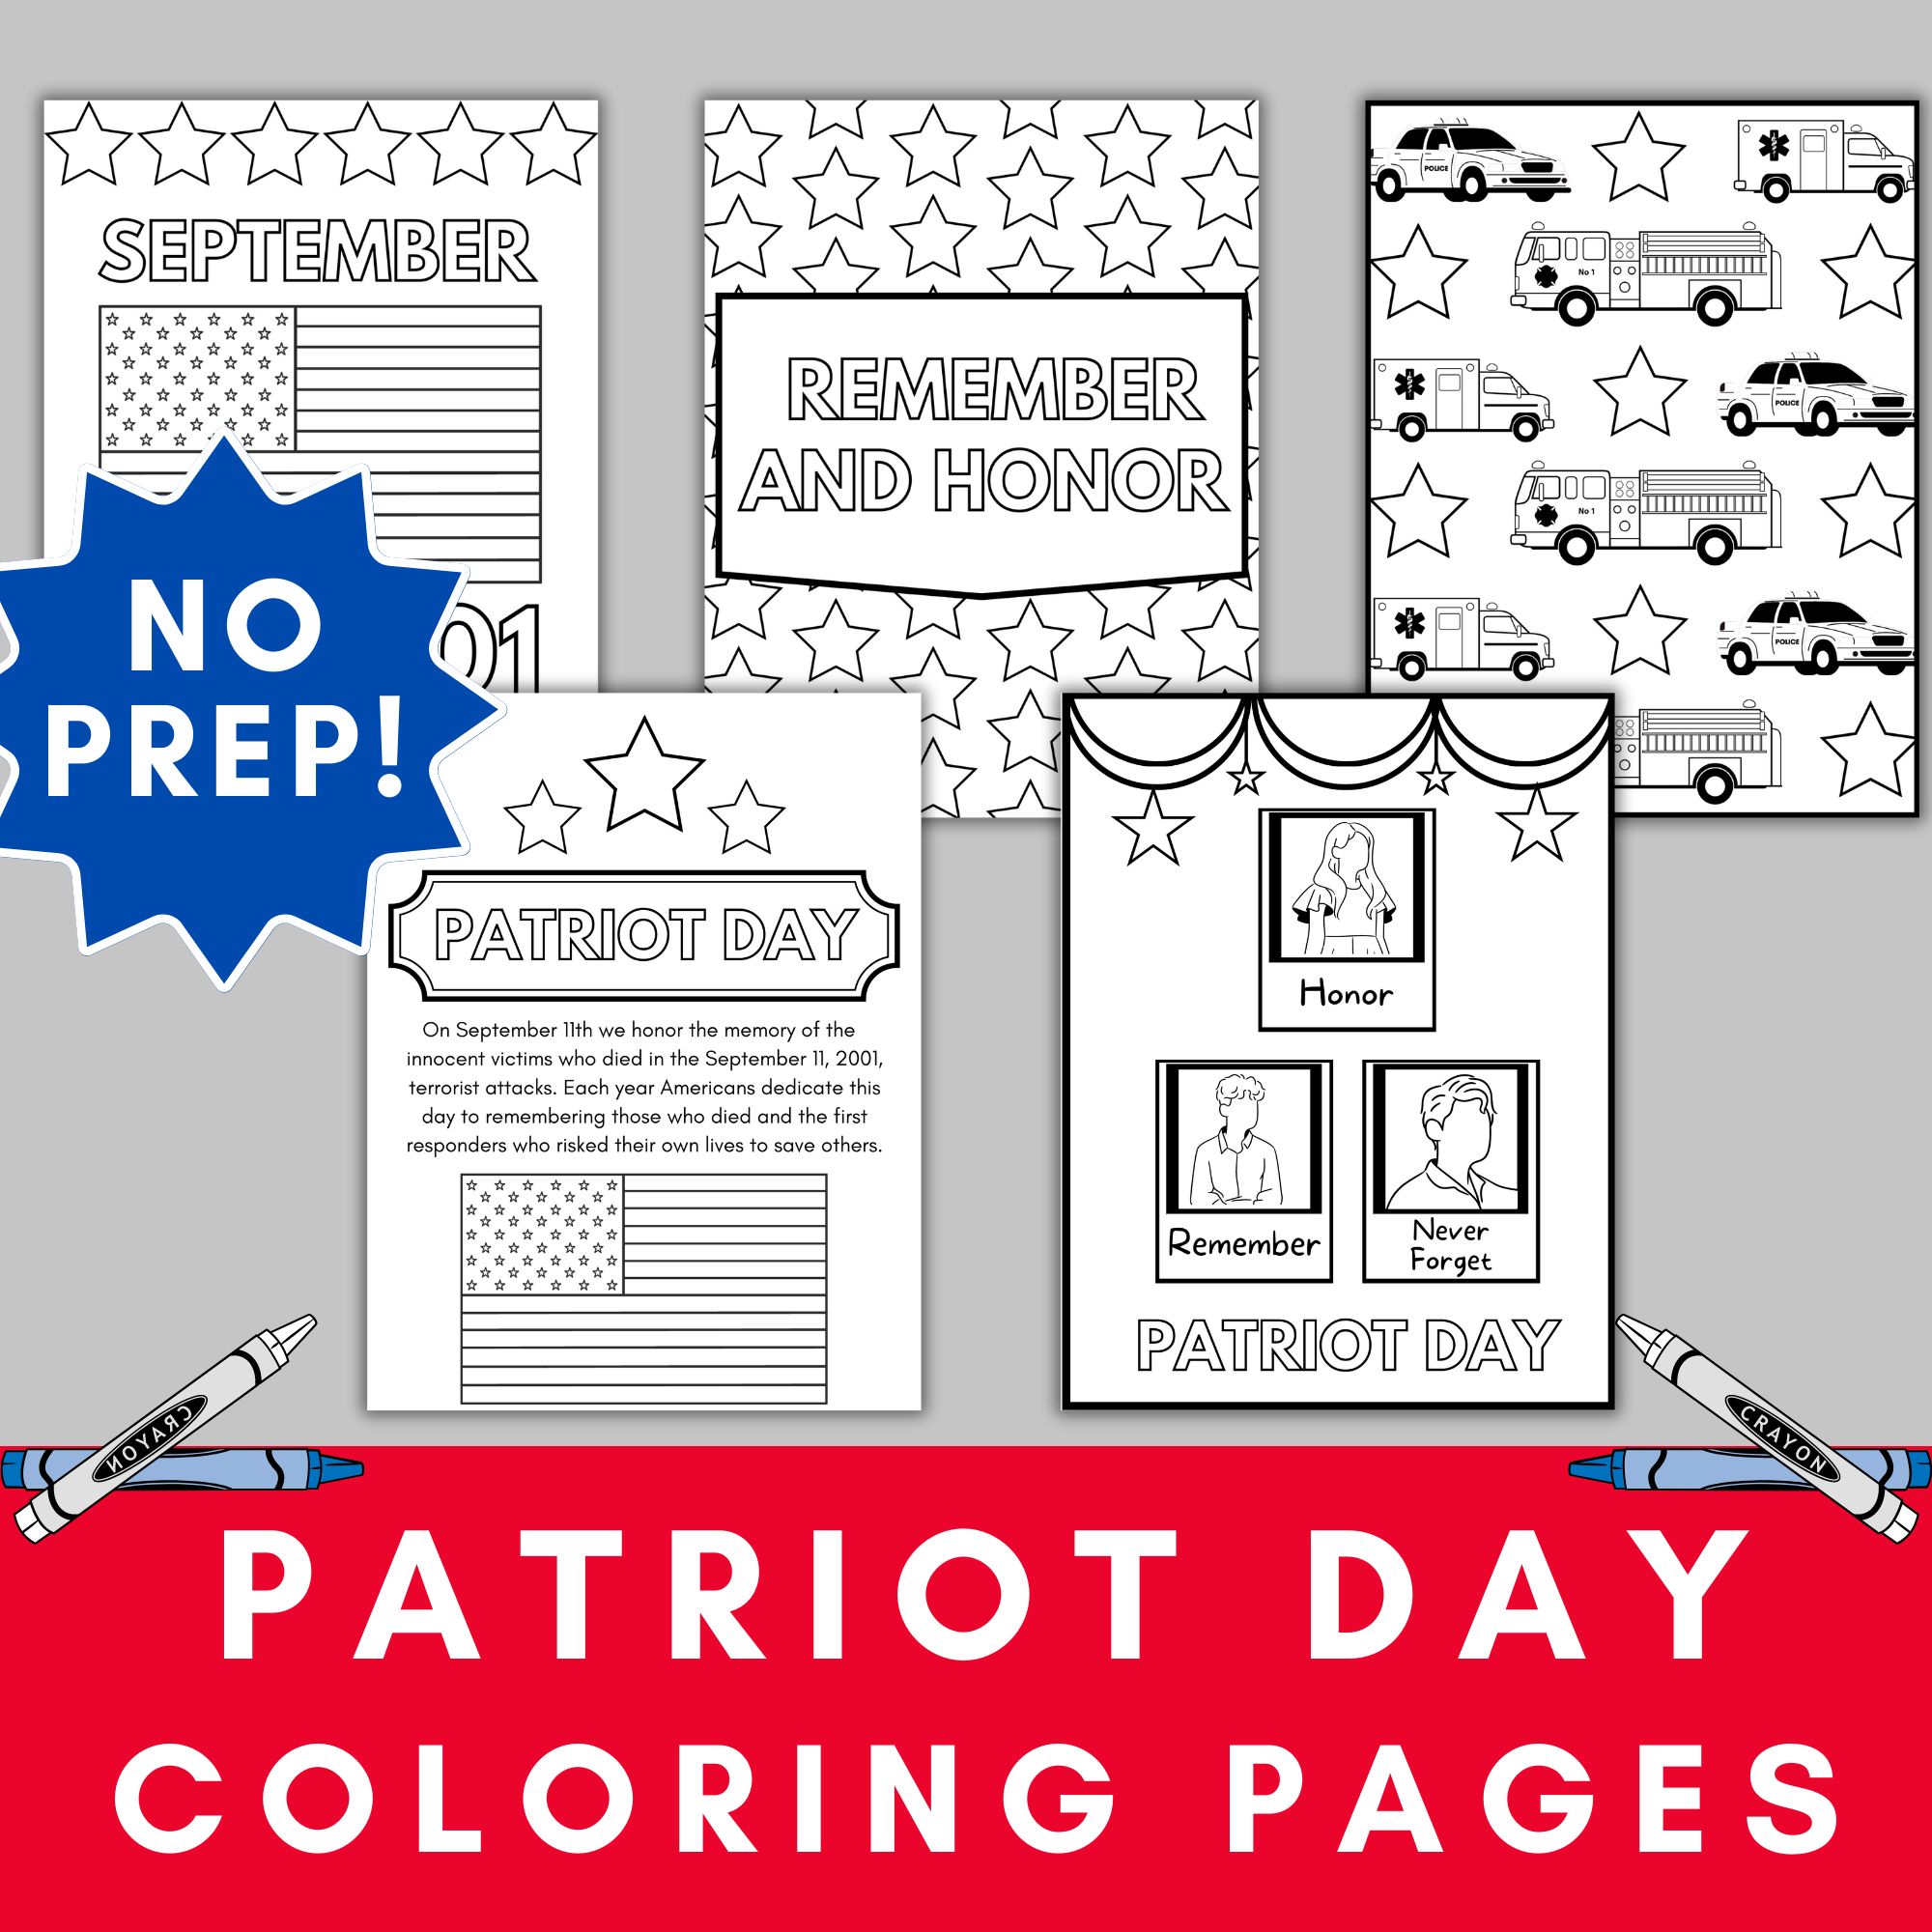 September patriot day printable coloring pages made by teachers